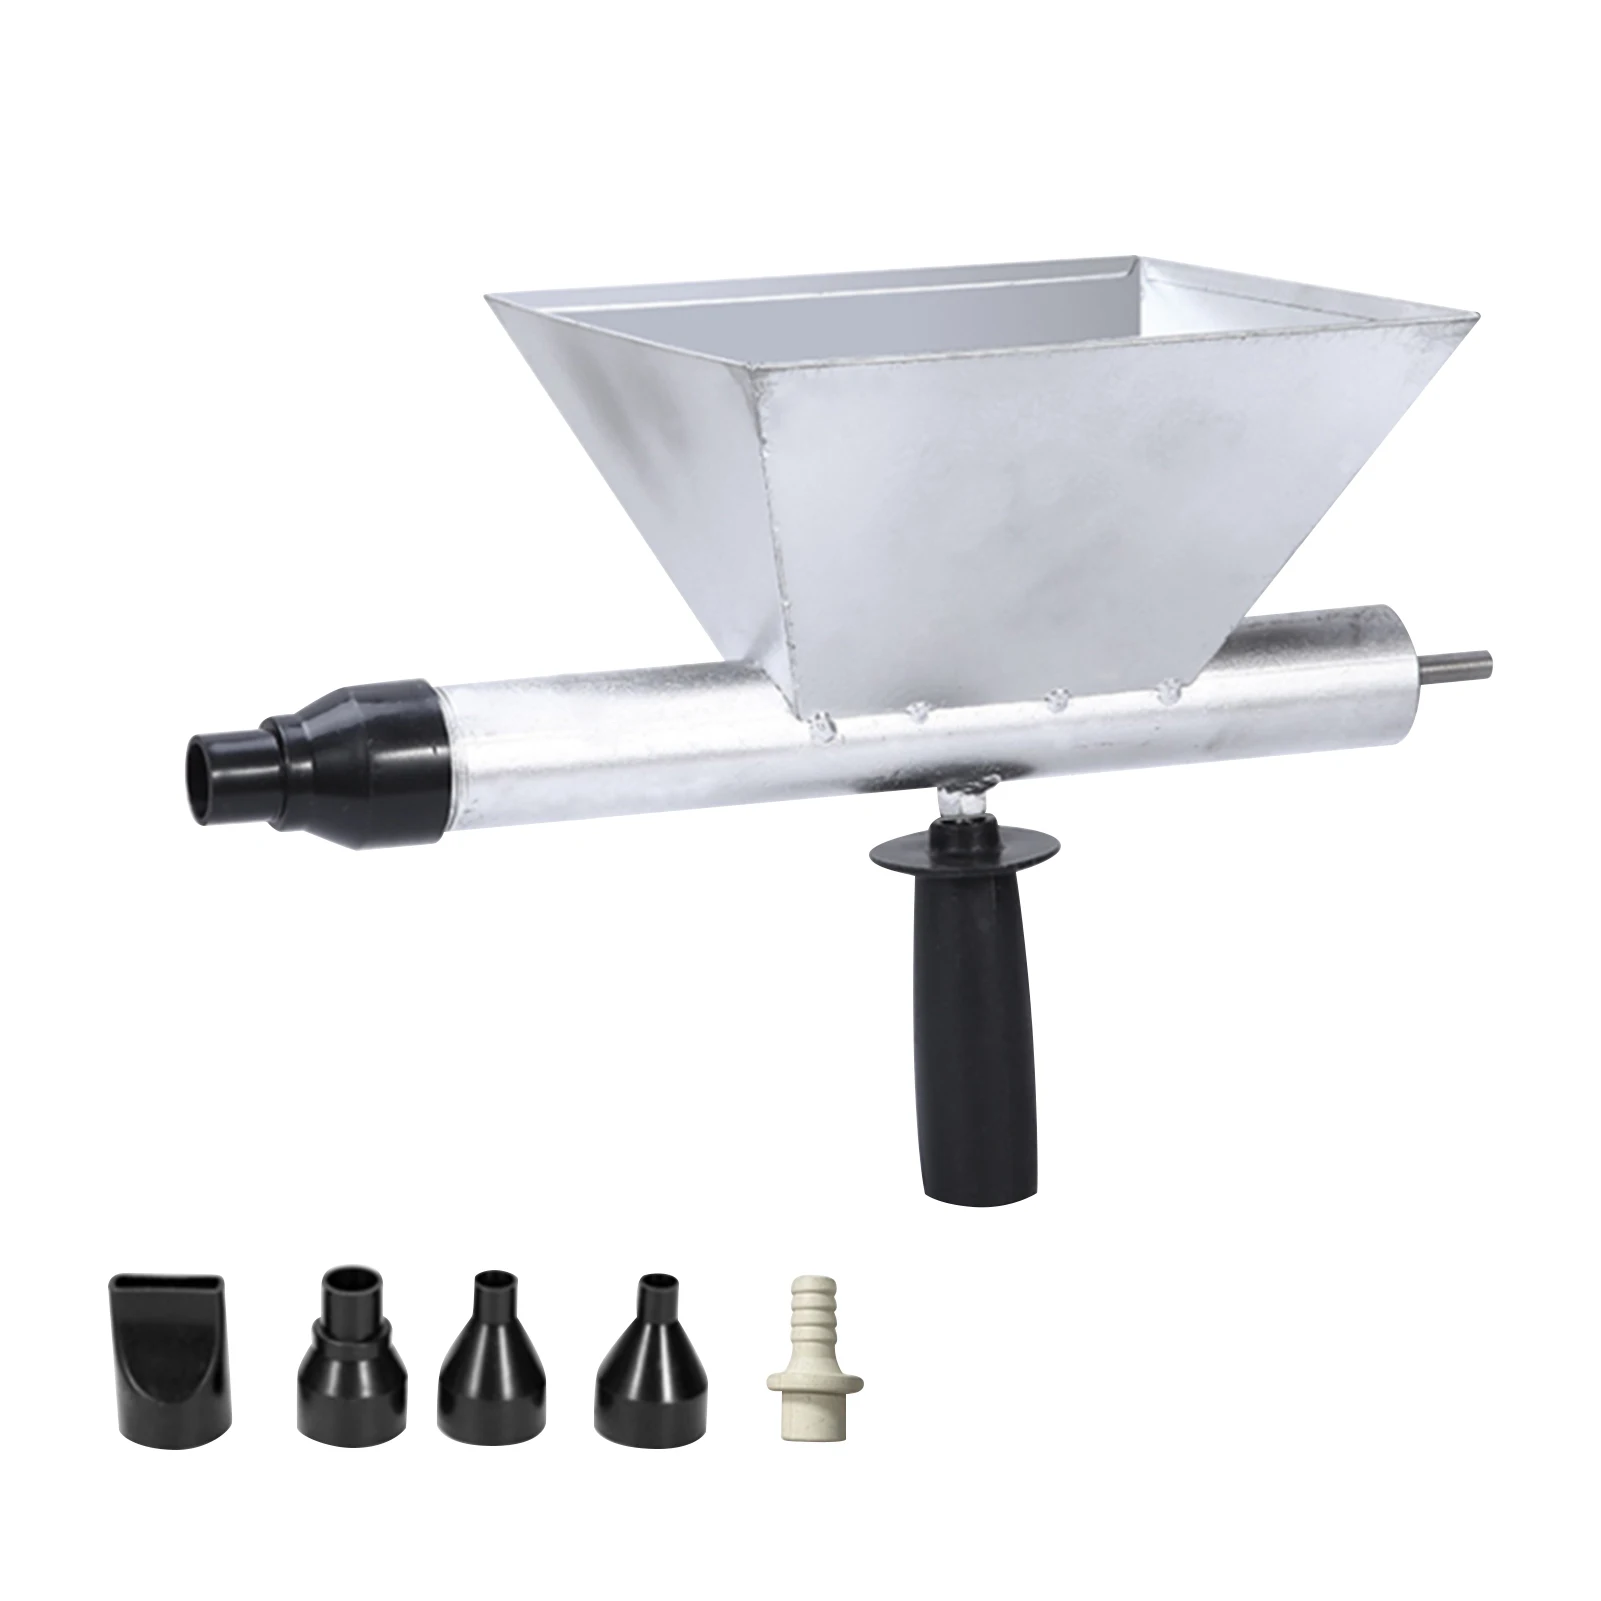 

Alloy Steel Portable Pointing Window Funnel Shaped Electric Mortar Grouting Machine For Caulking Wall With 3 Nozzles Power Tool